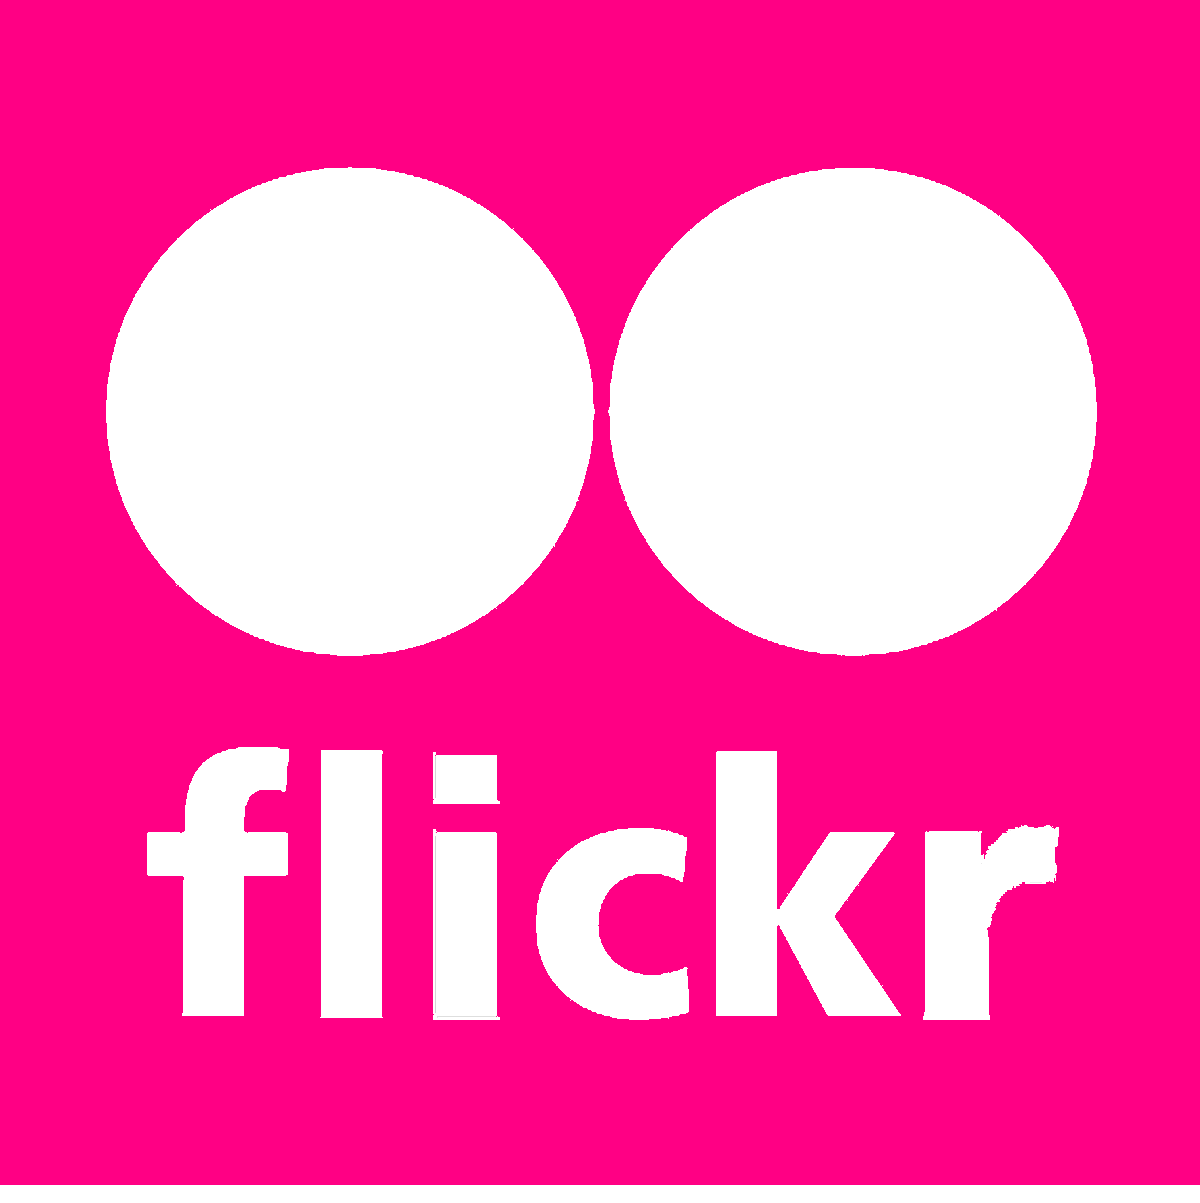 High Quality Flickr Logo Cliparts For Free Png Transparent Background Free Download 8775 Freeiconspng